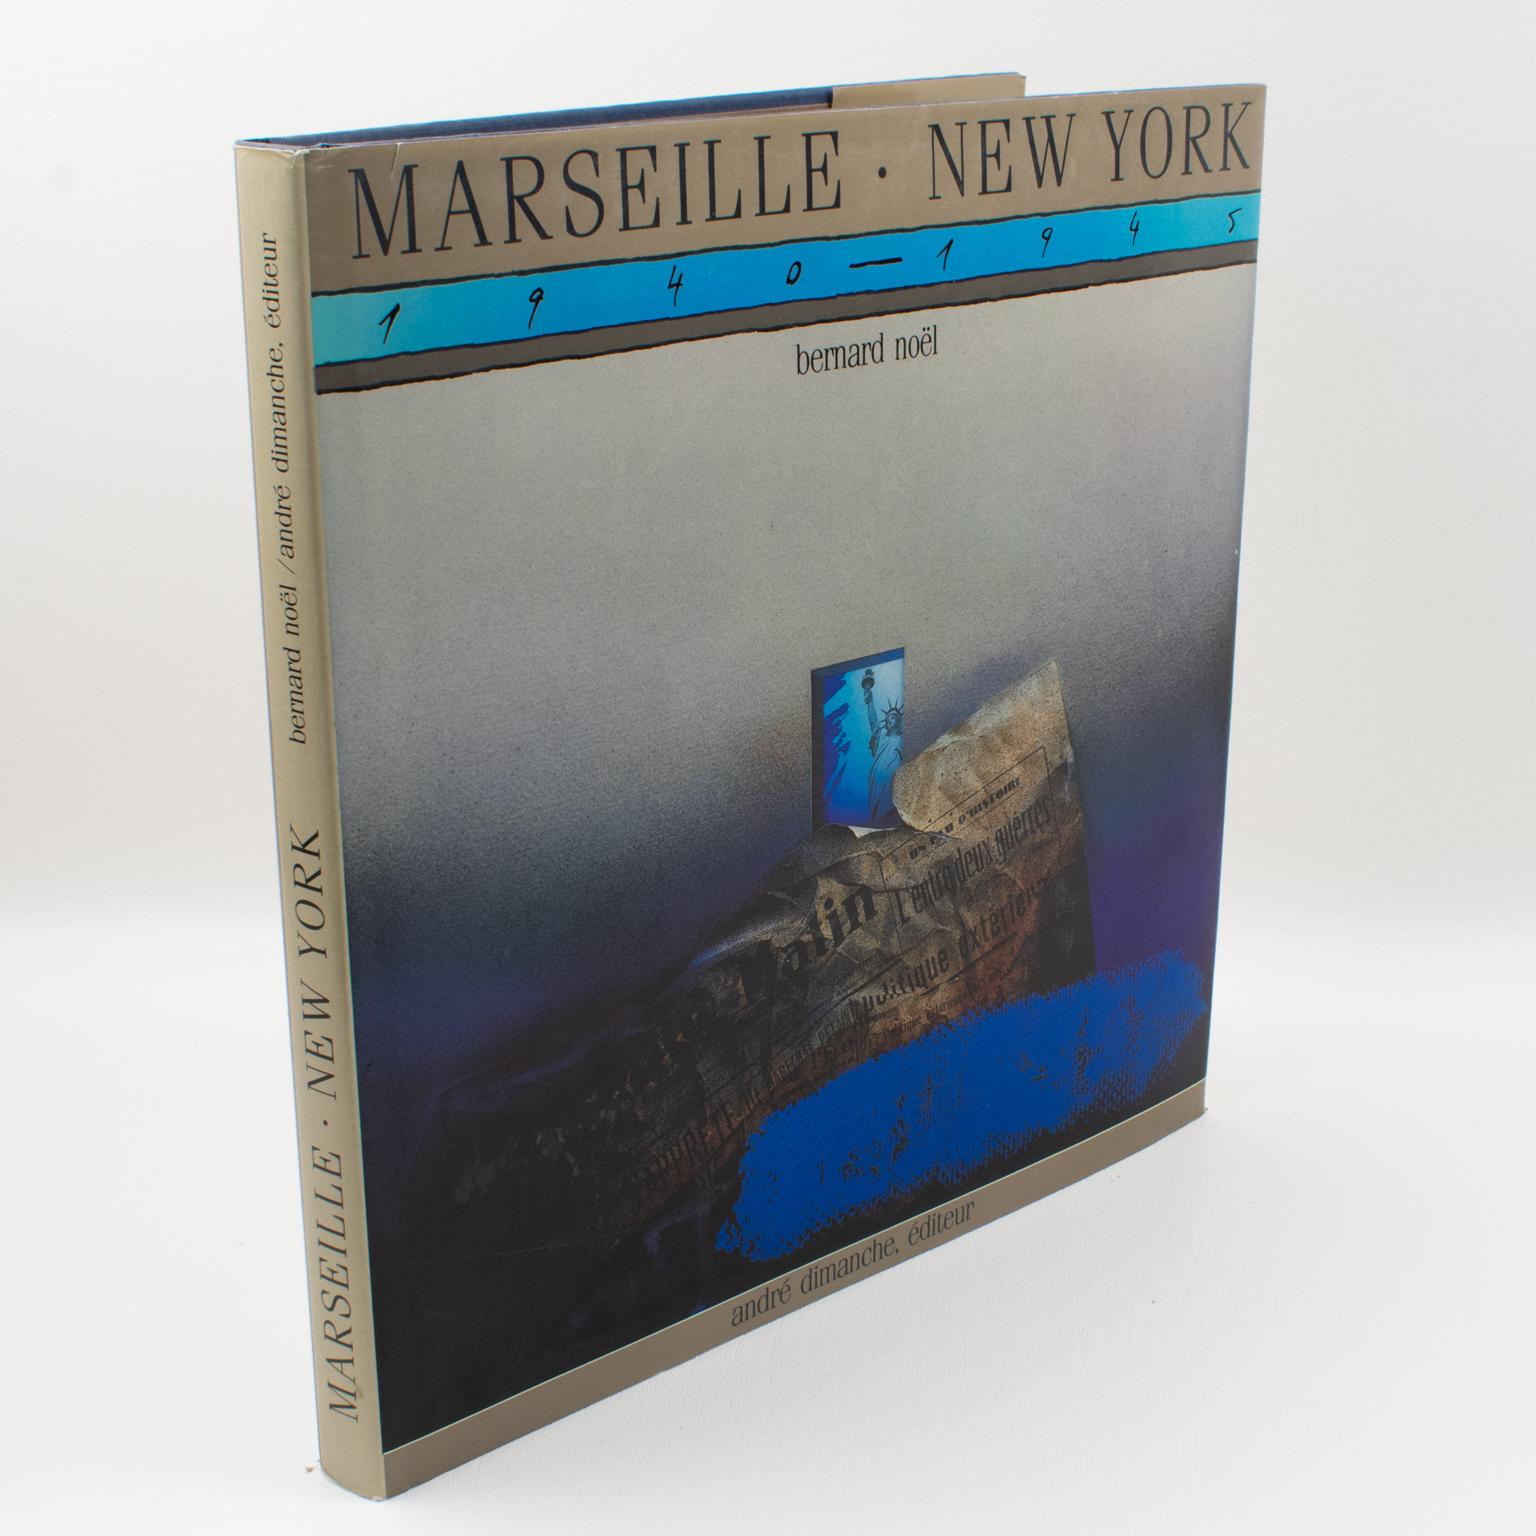 Marseille - New York. 1940-1945, une liaison surrealiste (Marseille - New York. 1940-1945, a surrealistic link), French/English book by Bernard Noel, 1985.
Through archival photographs and artwork, this book tells the dual story of Marseille,